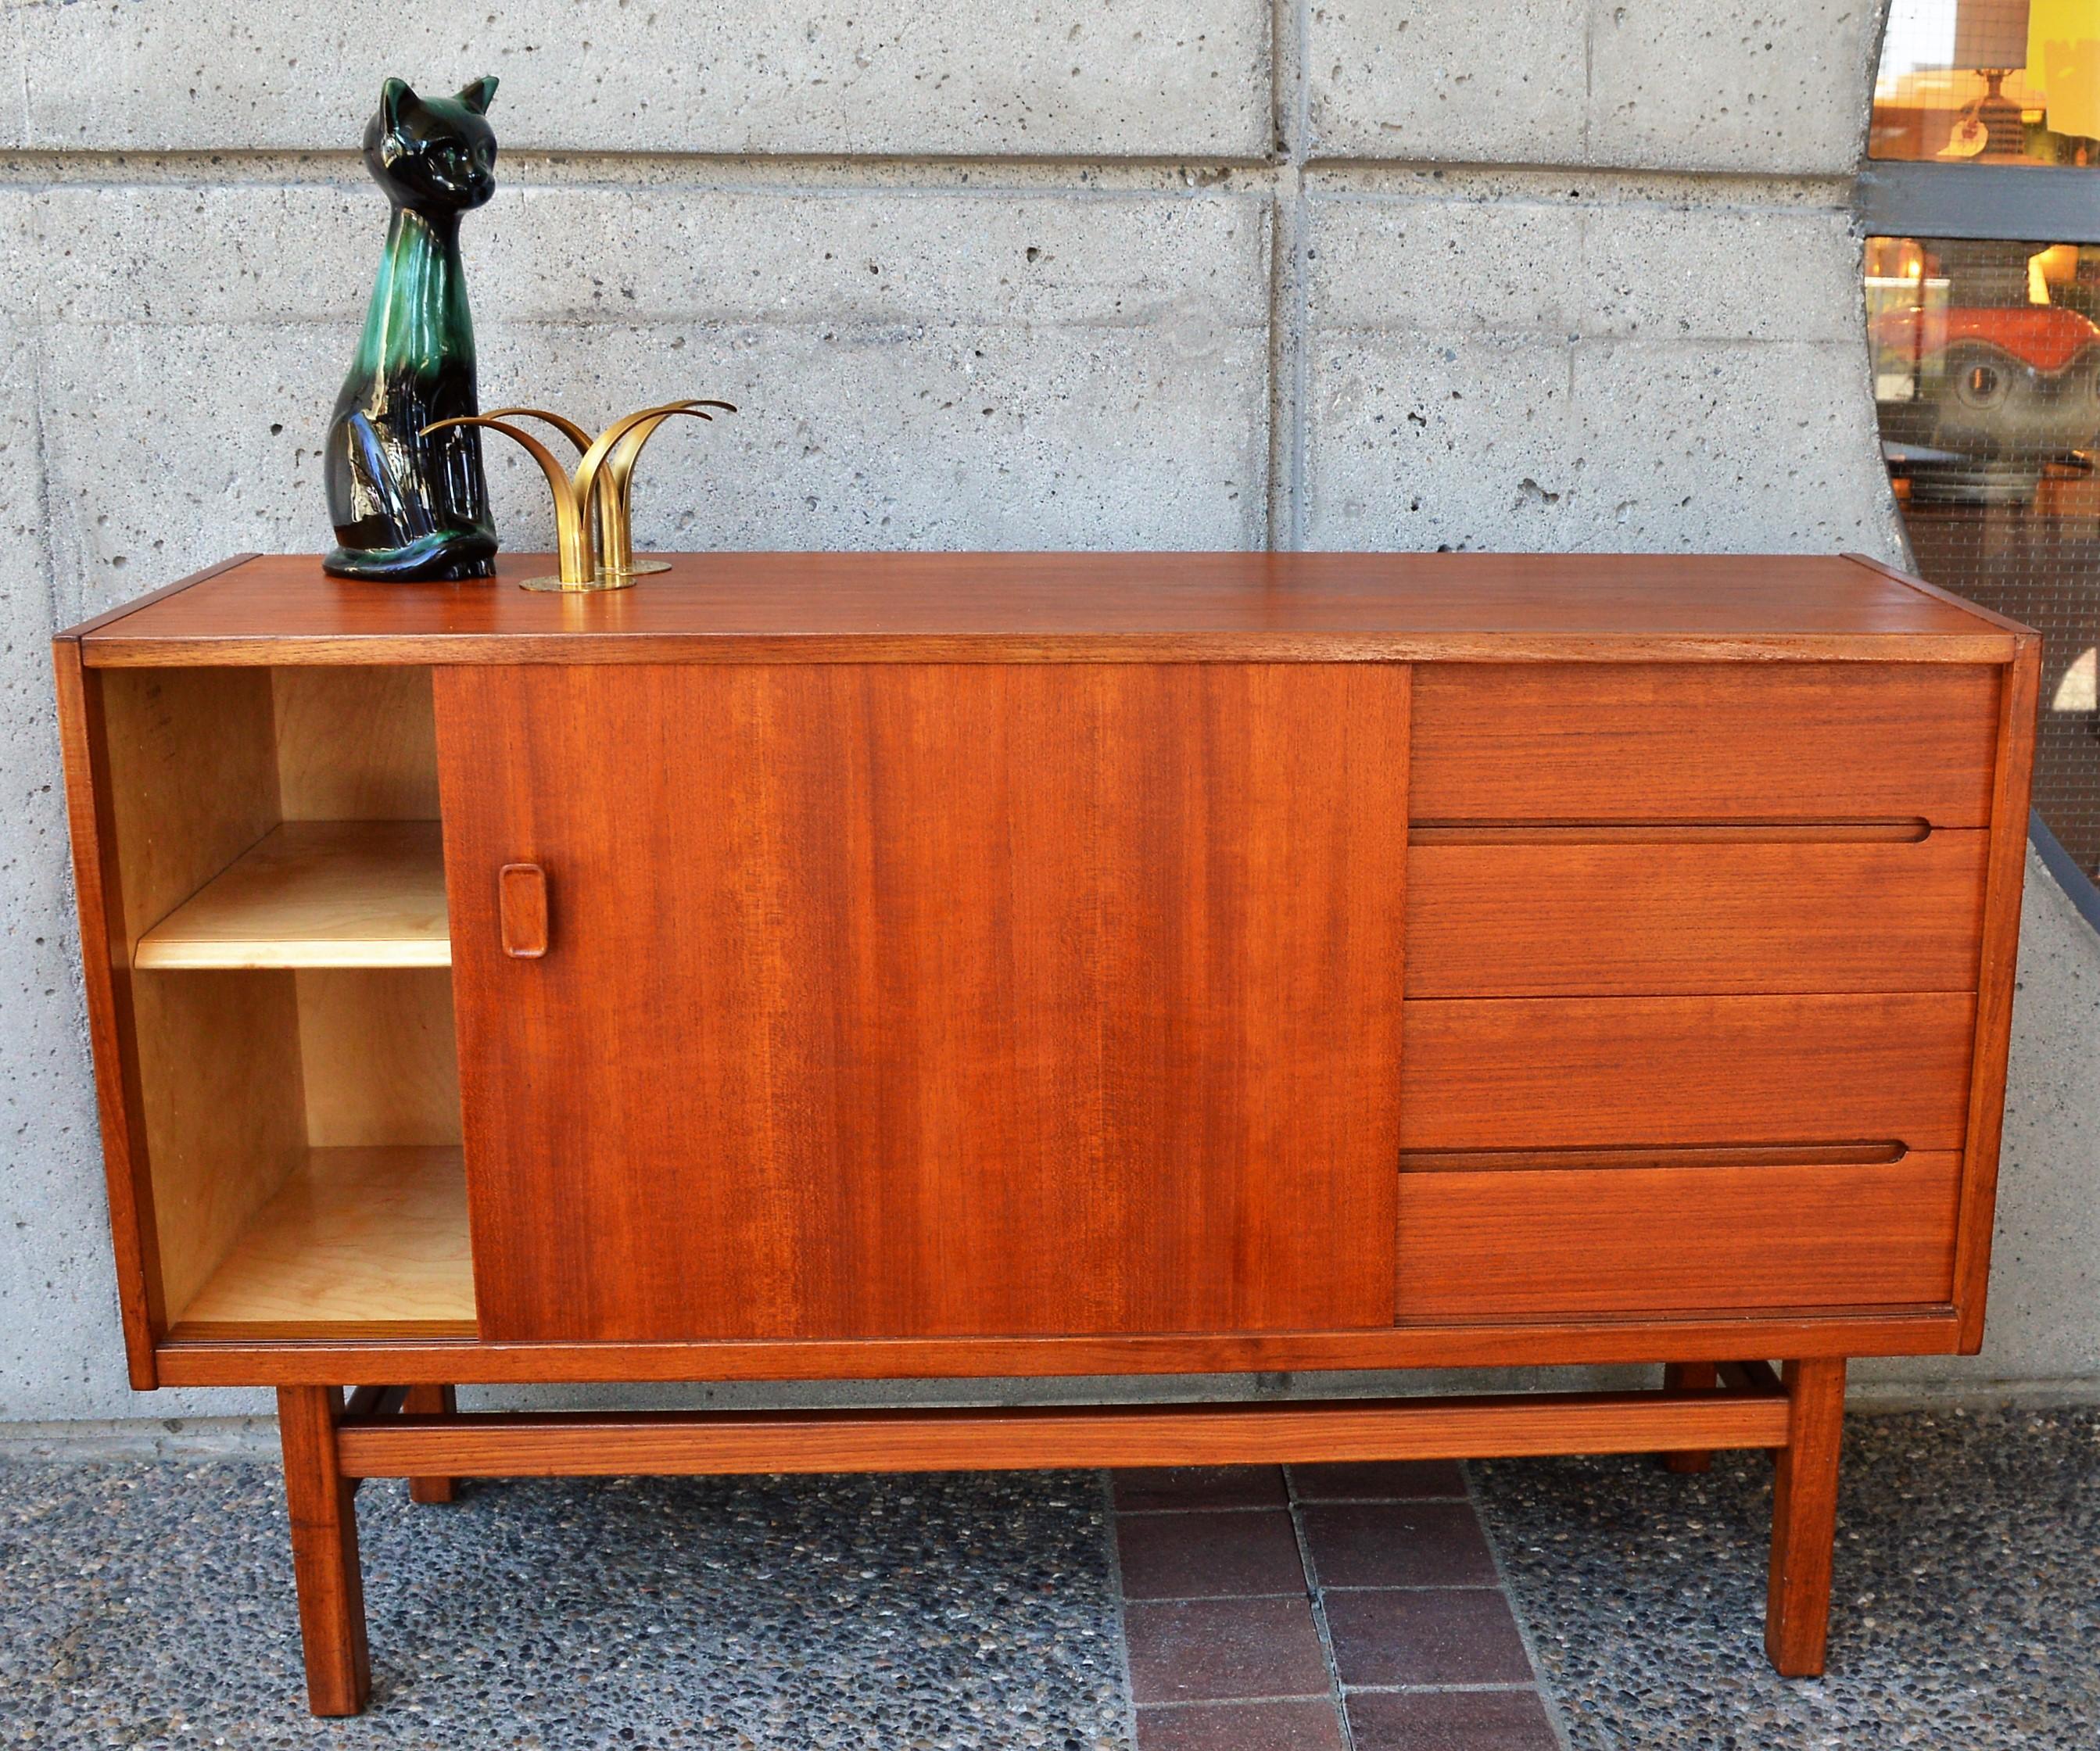 This nice smaller Danish modern all wood teak buffet / credenza was designed by Nils Jonsson for Troeds, 1960s, the Viken Model. The teak body with a lighter beech interior, features one slider with a sculptural teak door pull, which opens to reveal